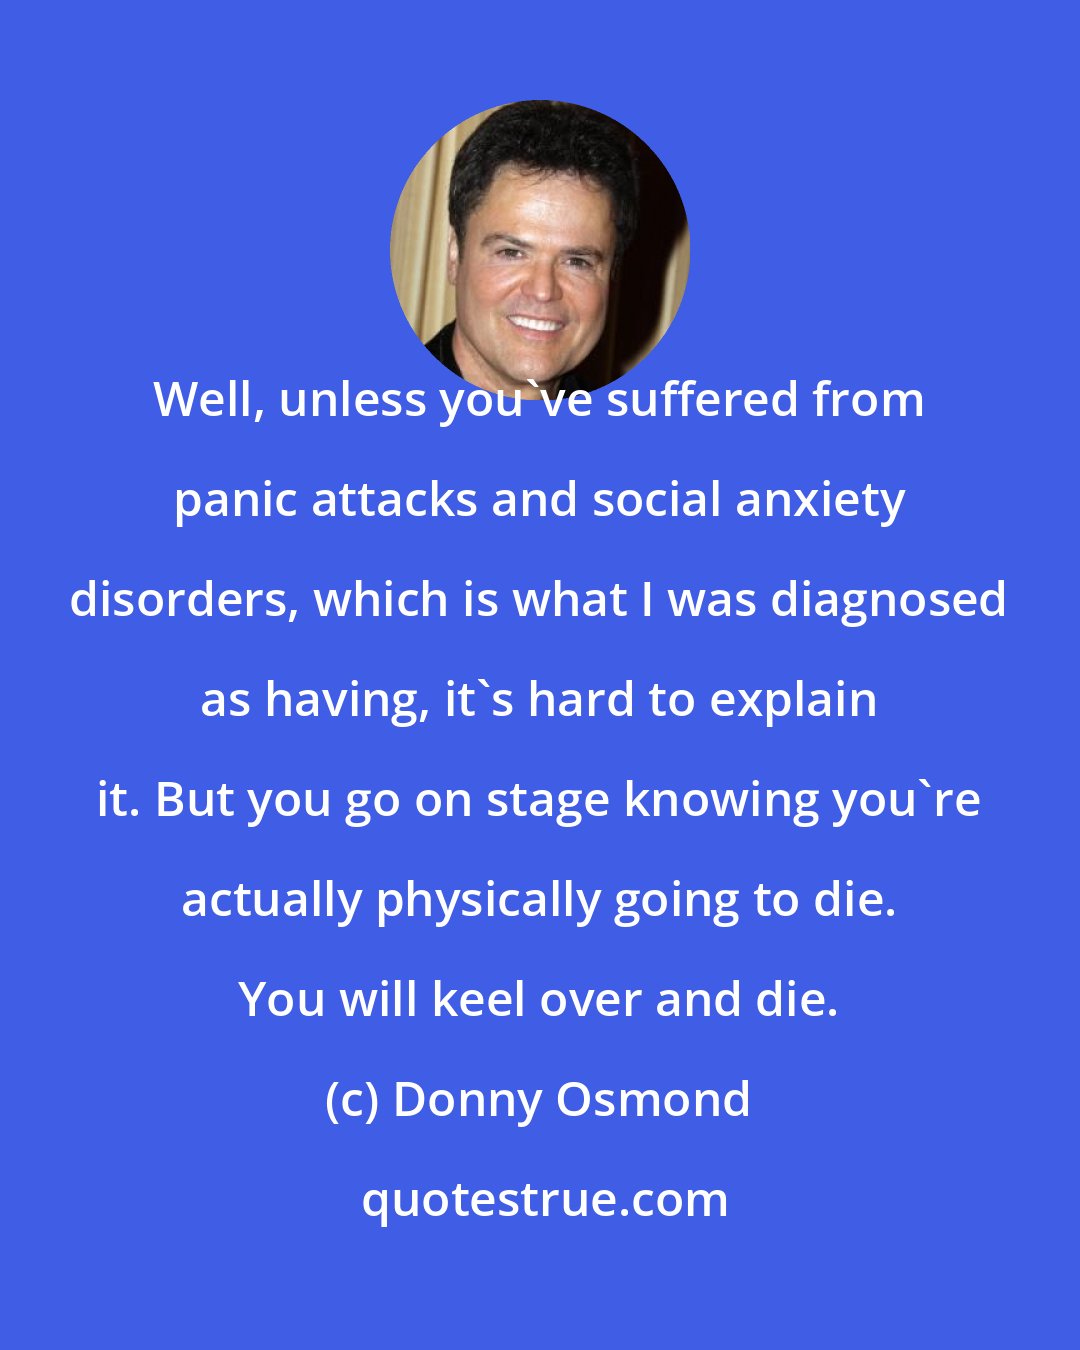 Donny Osmond: Well, unless you've suffered from panic attacks and social anxiety disorders, which is what I was diagnosed as having, it's hard to explain it. But you go on stage knowing you're actually physically going to die. You will keel over and die.